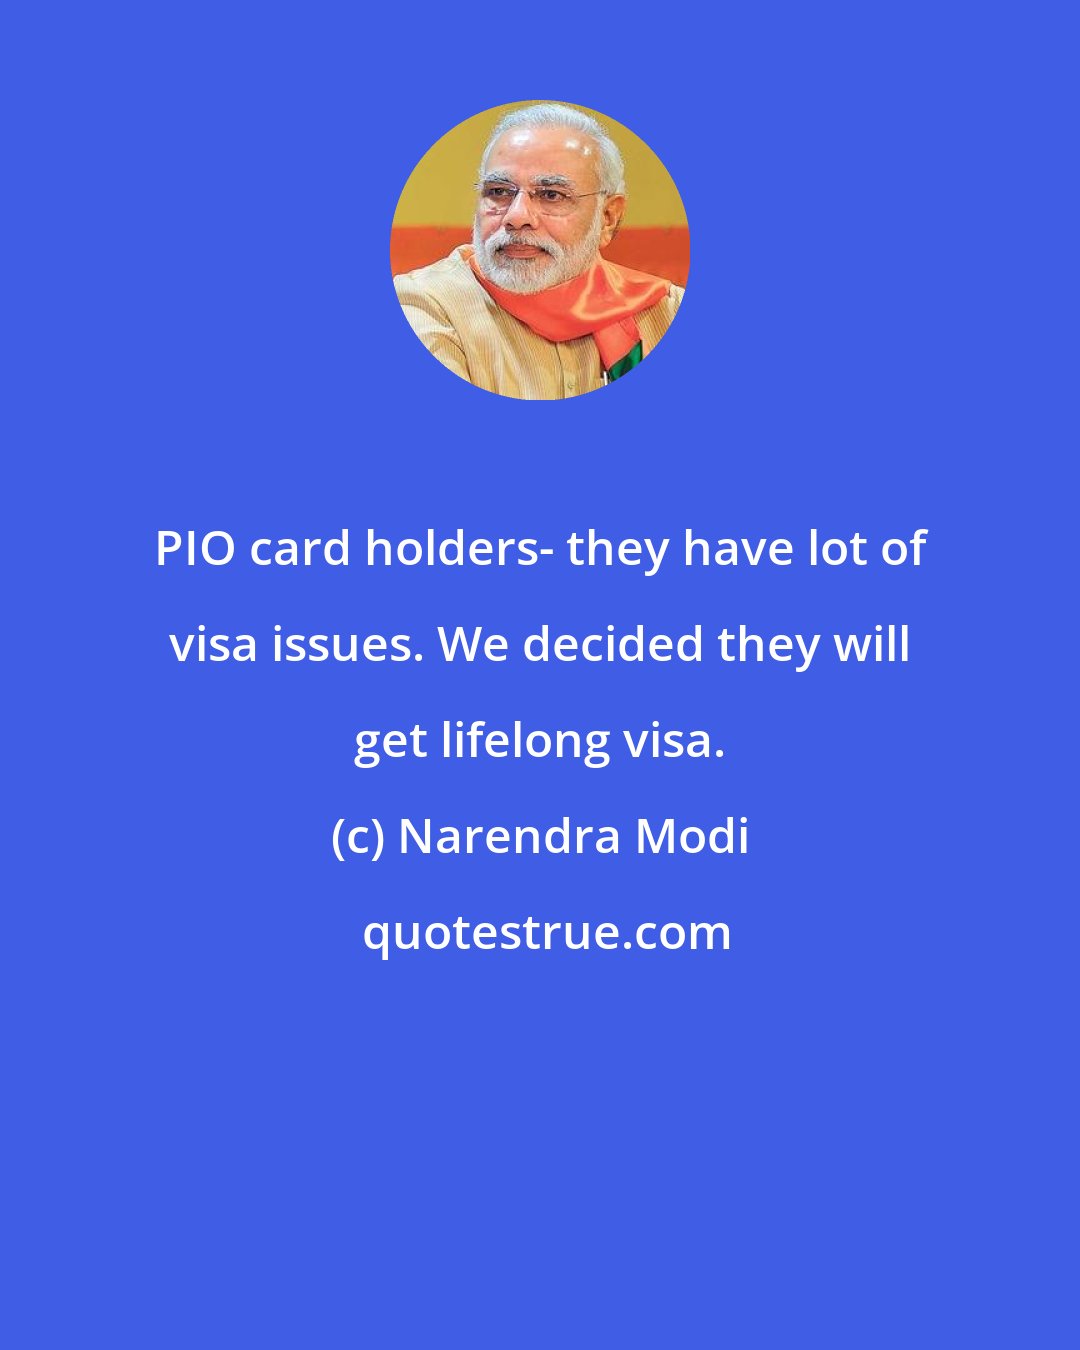 Narendra Modi: PIO card holders- they have lot of visa issues. We decided they will get lifelong visa.